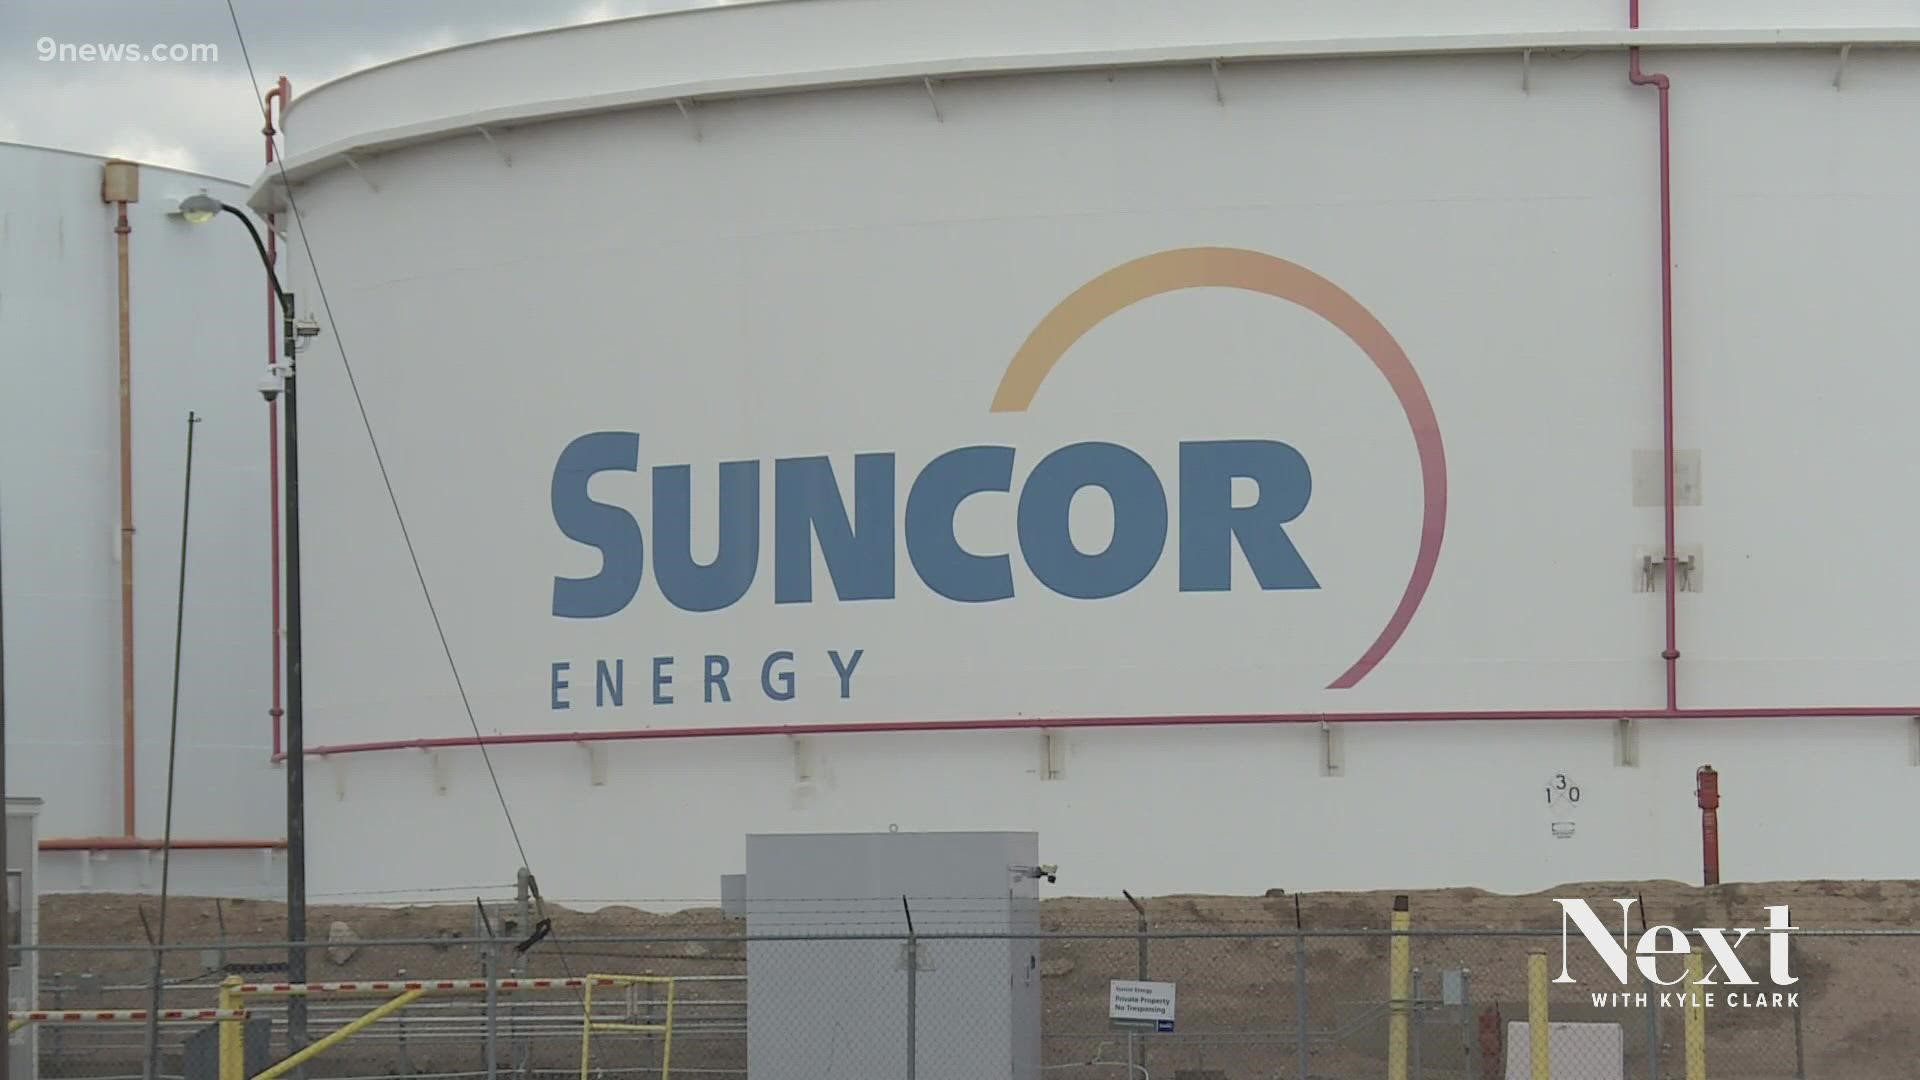 One of five programs to improve public health around the Suncor Refinery in Commerce City is now live. It's part of a $9M settlement with Colorado regulators.